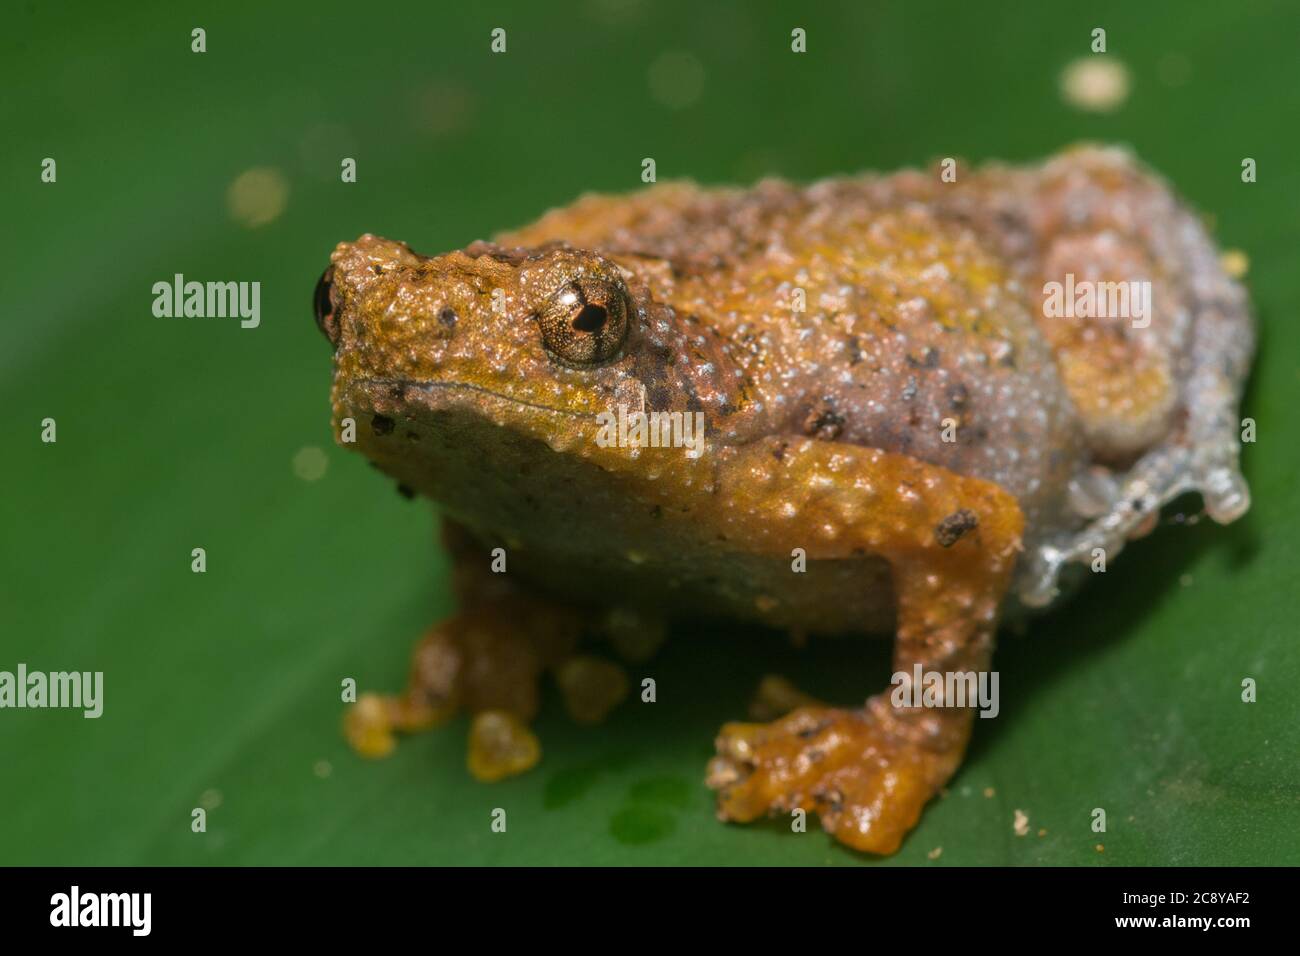 The borneo tree hole frog (Metaphrynella sundana) a small microhylid endemic to the rainforests in Borneo. Stock Photo